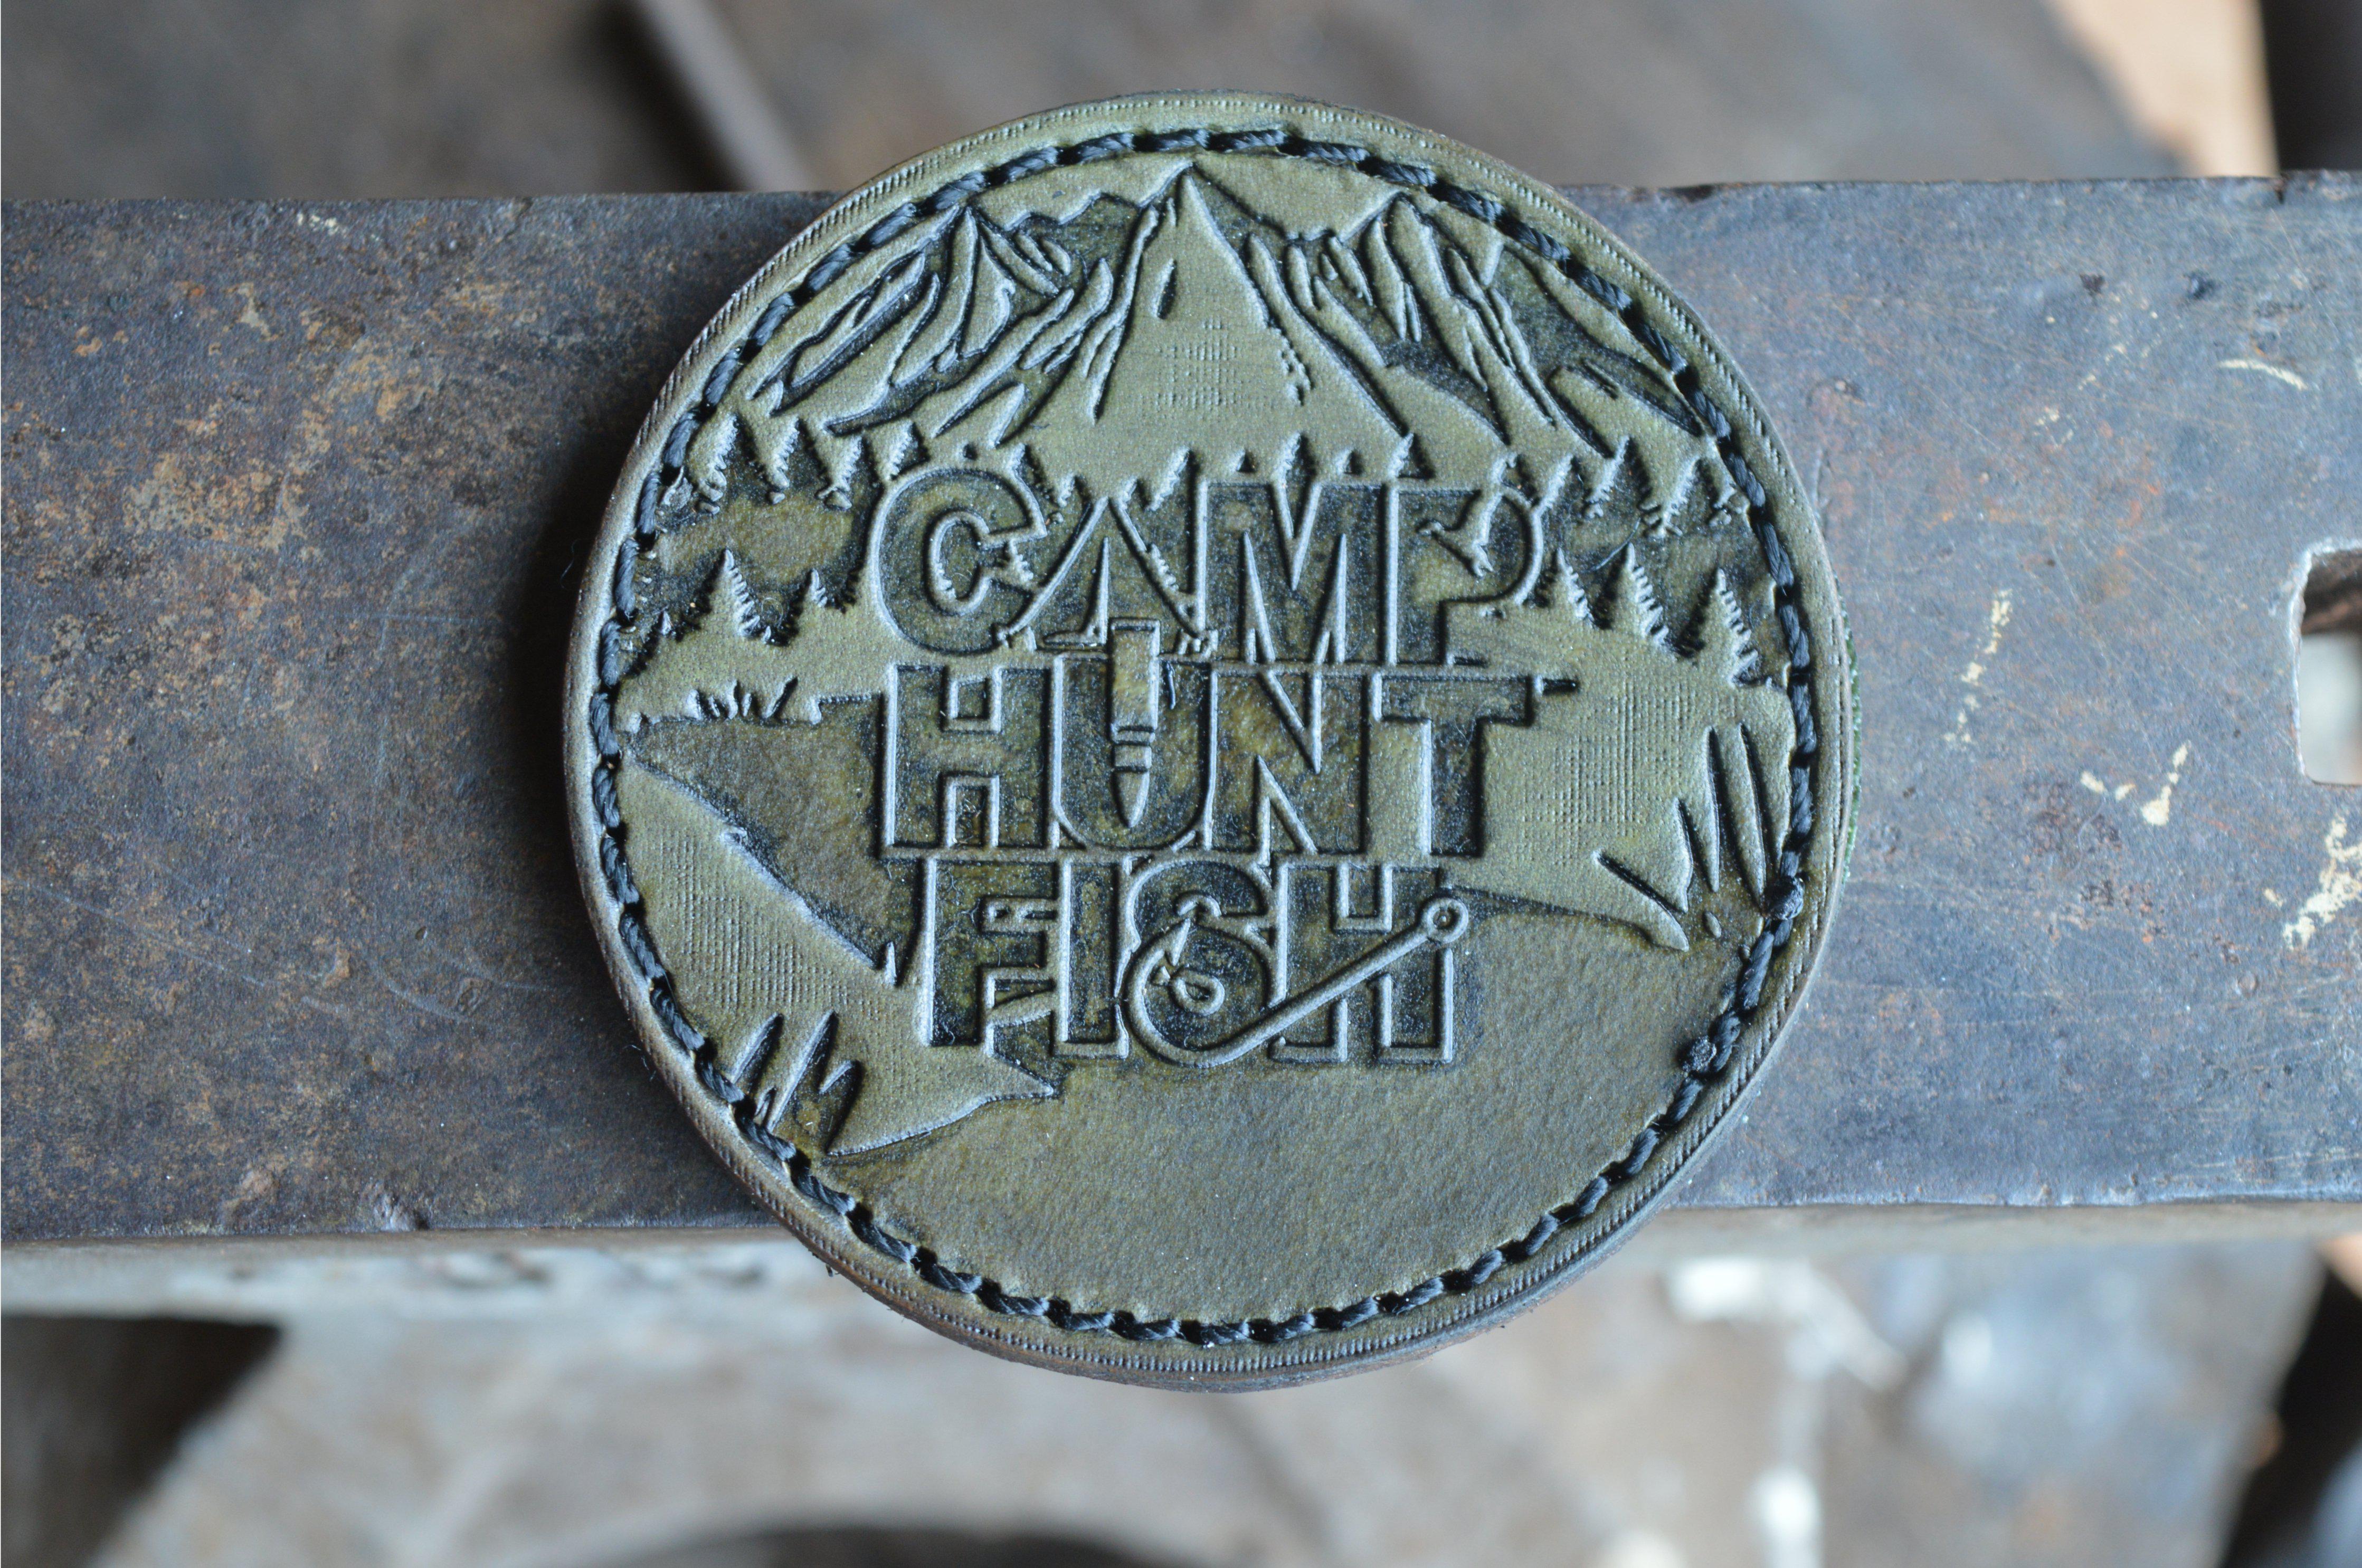 RMK Camp Hunt Fish Leather Patch